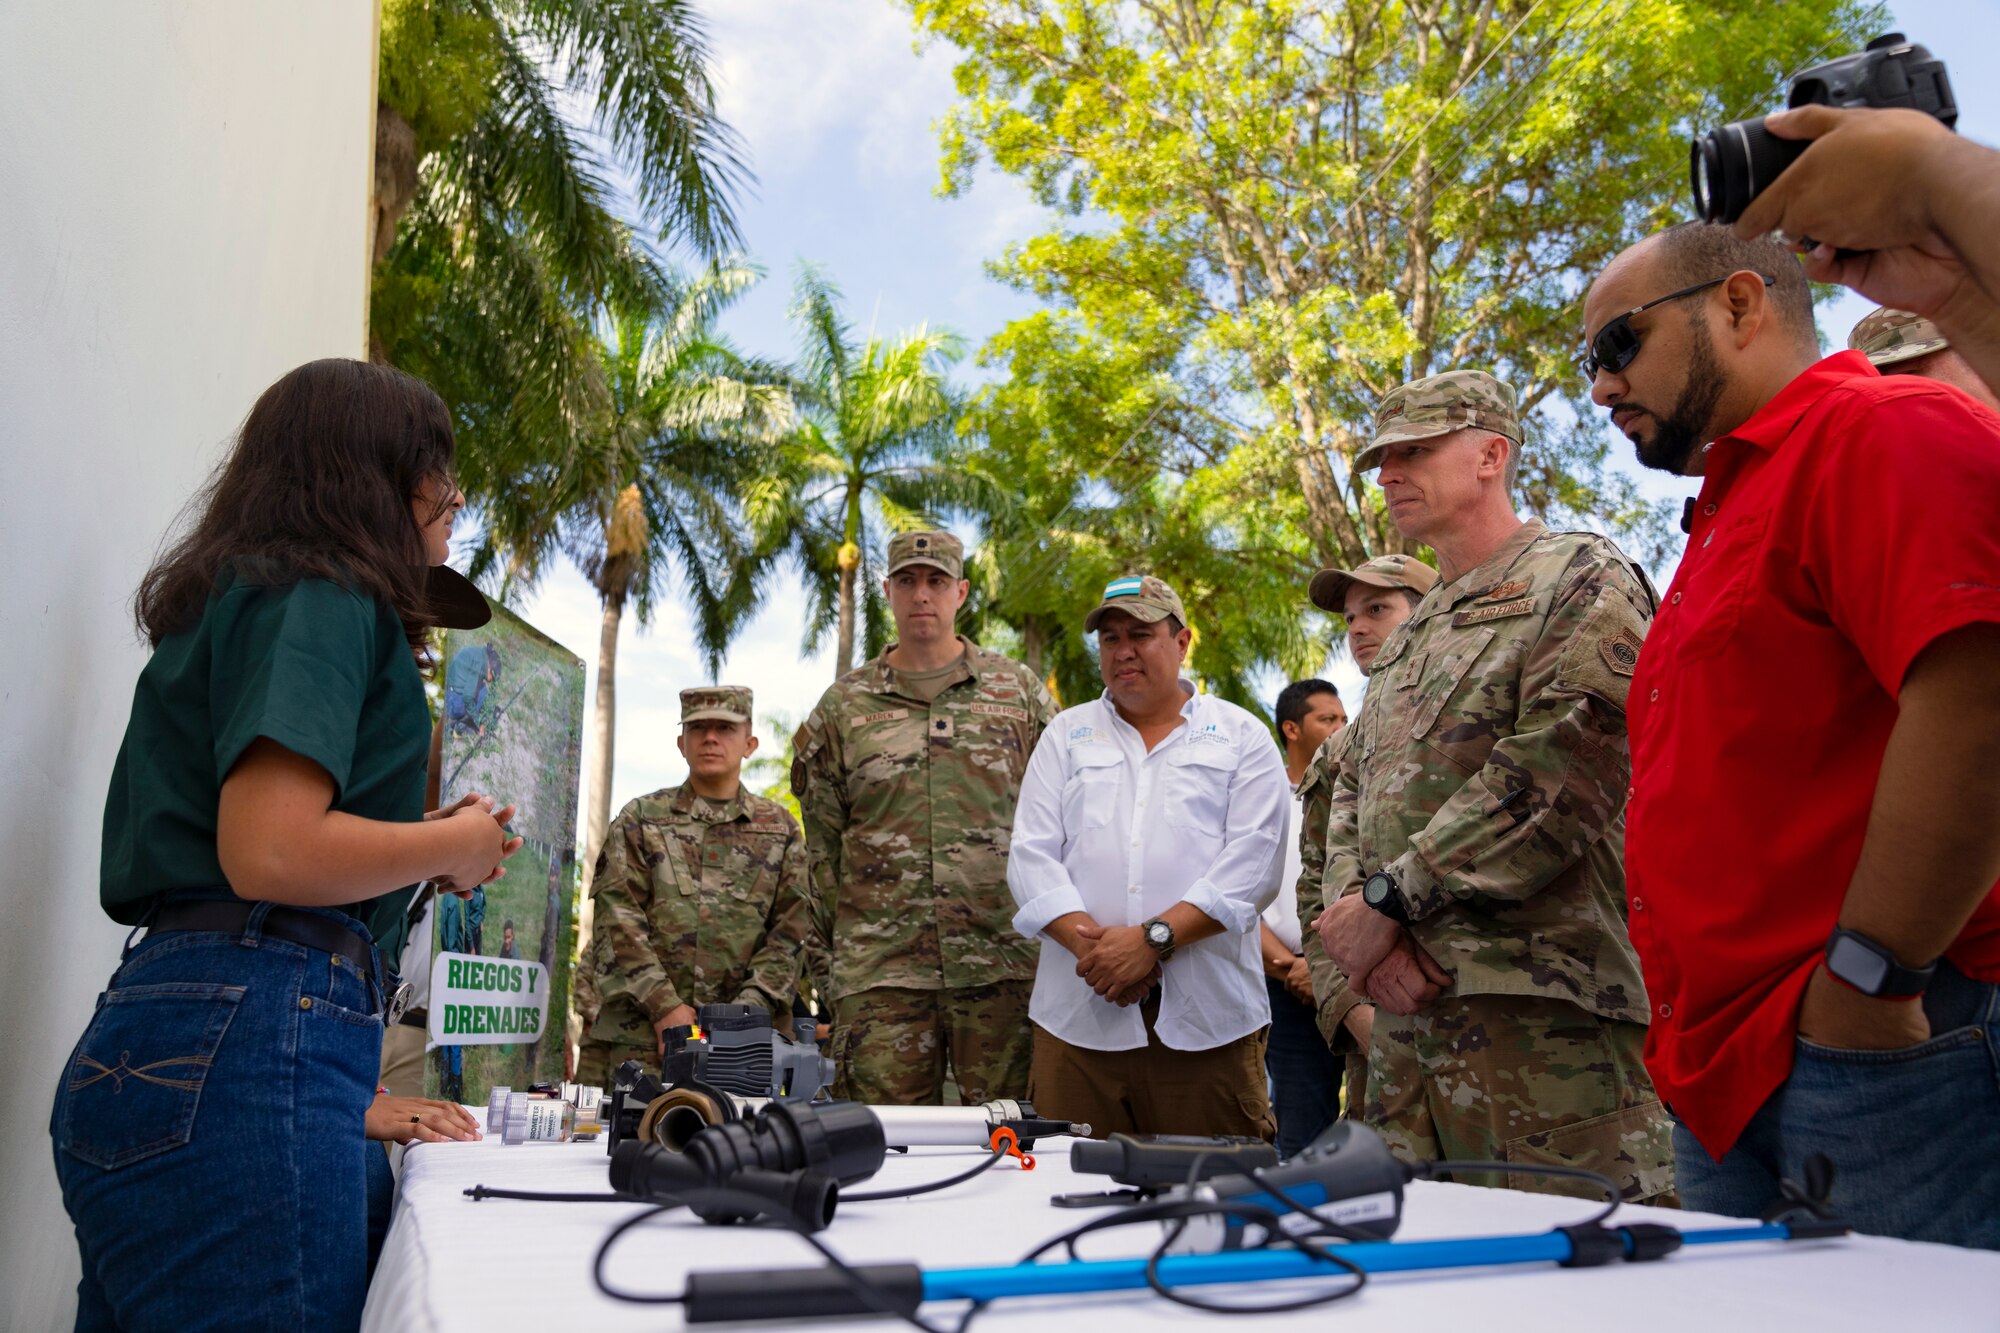 Honduran Minister of Education, Professor Daniel Esponda, right, and U.S. Maj. Gen. Evan Pettus, 12th Air Force (Air Forces Southern) commander, second from right, listen to a student describe irrigation and drainage concepts at the System of Technological and Agricultural Innovation (SCITA) in Comayagua, Honduras, Aug. 4, 2023. U.S. Southern Command's Humanitarian Assistance Program donated $25,000 to SCITA for improvements to infrastructure that are key to ensuring quality education for Hondurans. (U.S. Air Force photo by Tech. Sgt. Rachel Maxwell)